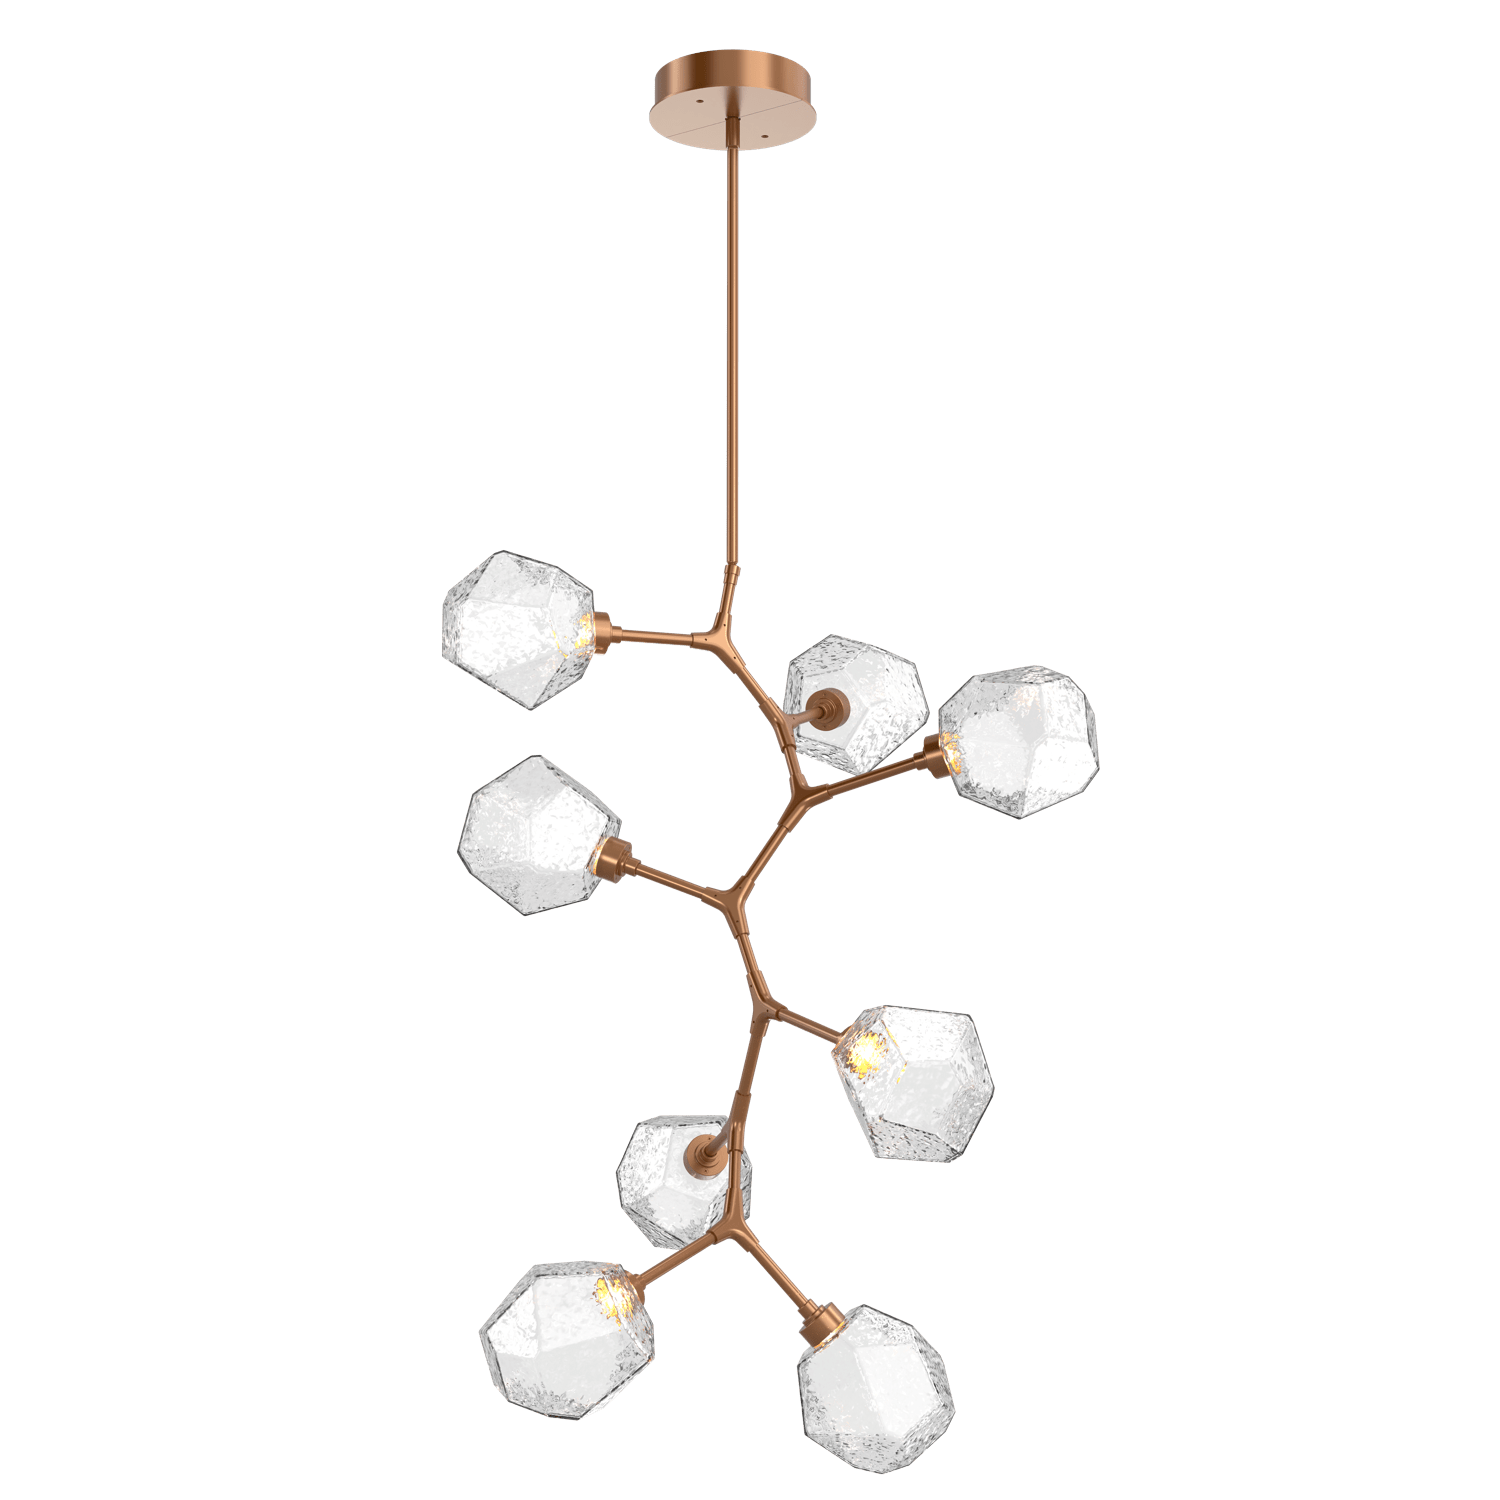 CHB0039-VB-NB-C-Hammerton-Studio-Gem-8-light-modern-vine-chandelier-with-novel-brass-finish-and-clear-blown-glass-shades-and-LED-lamping